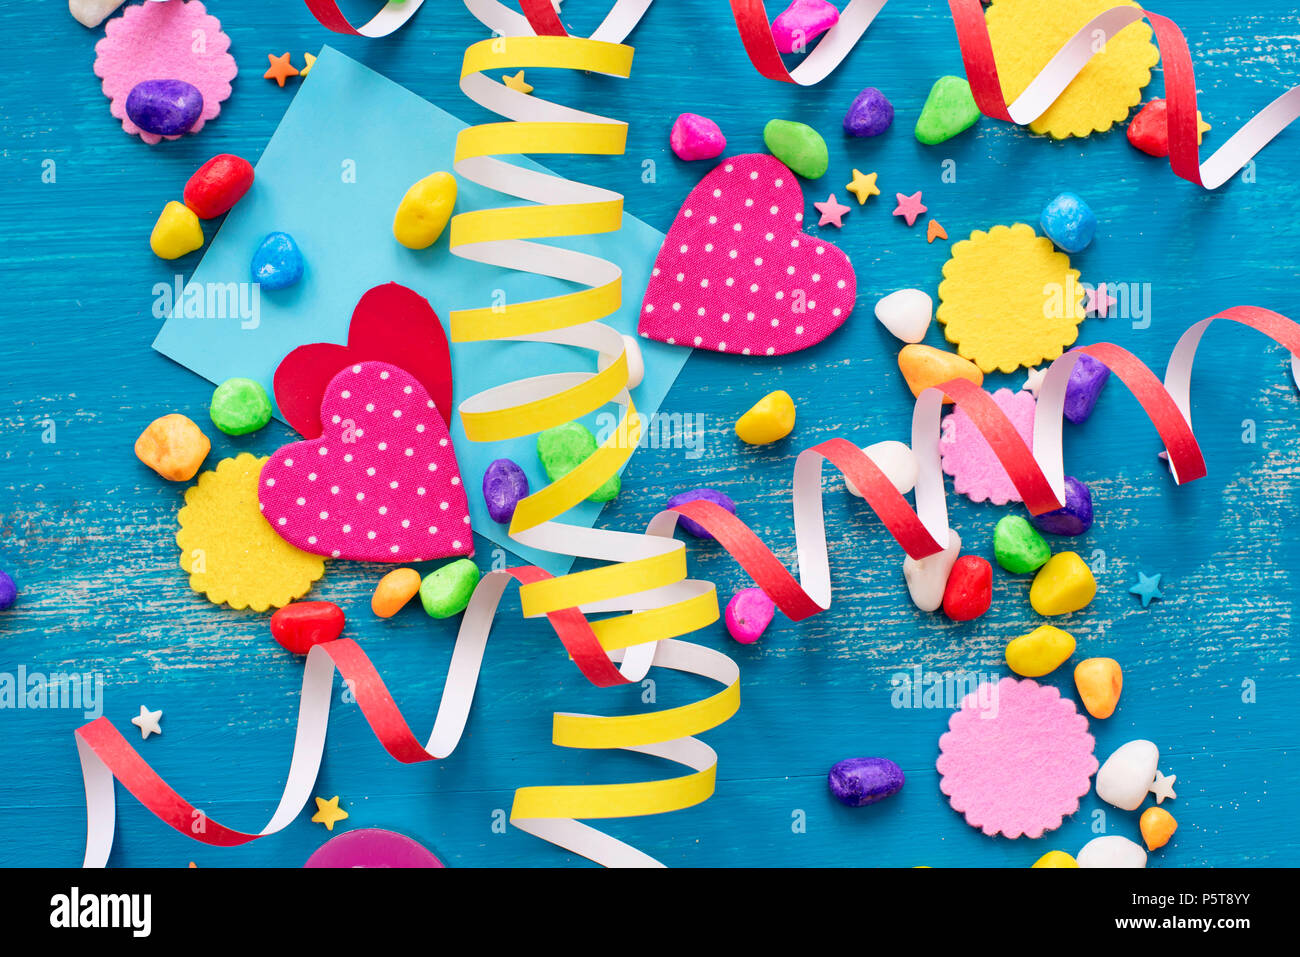 Festive confetti background heart candy color saturated. Wood old blue background with copy space flat lay Stock Photo